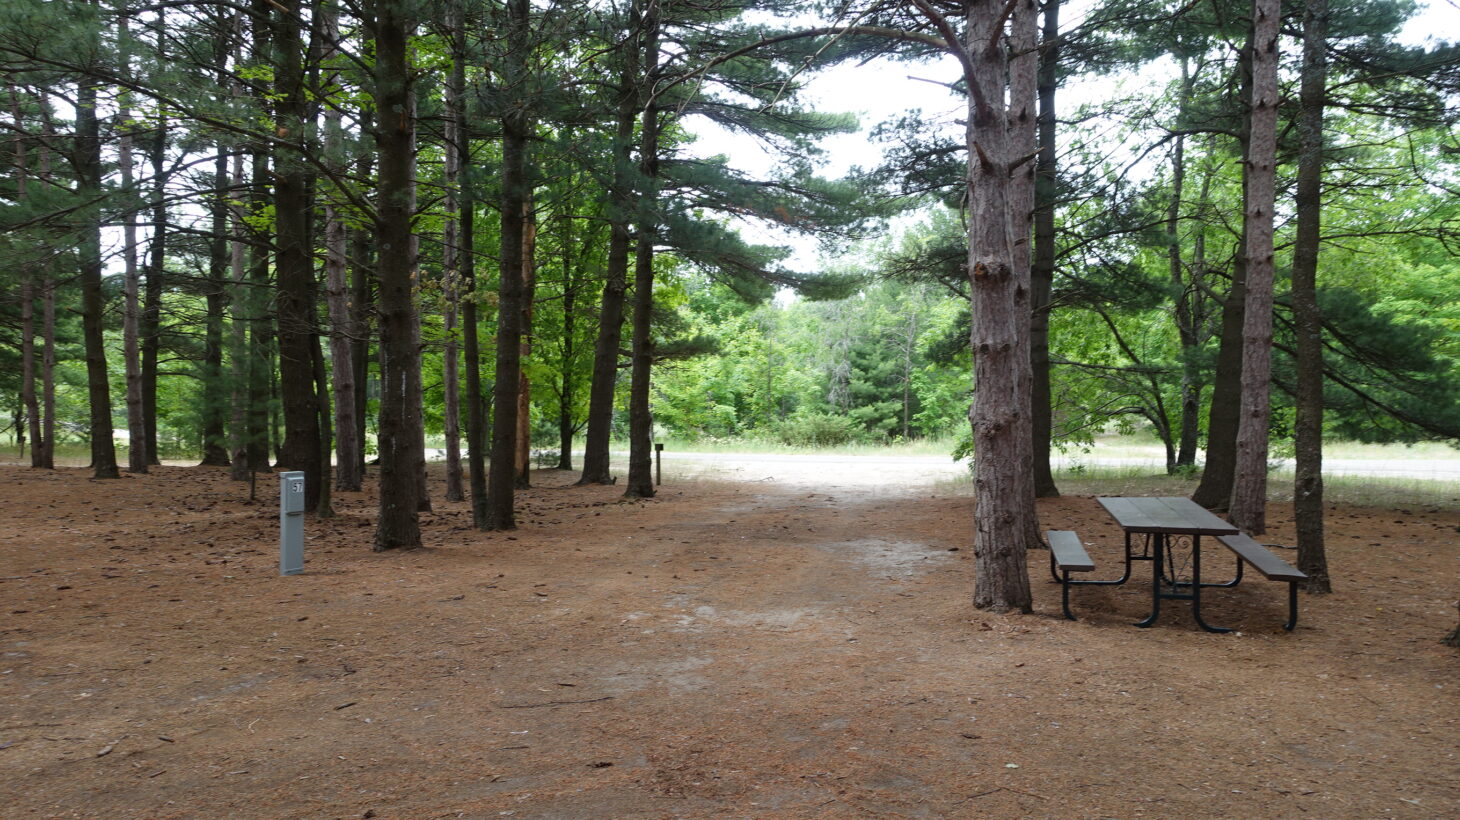 Shaded, wooded area with a picnic table for camping